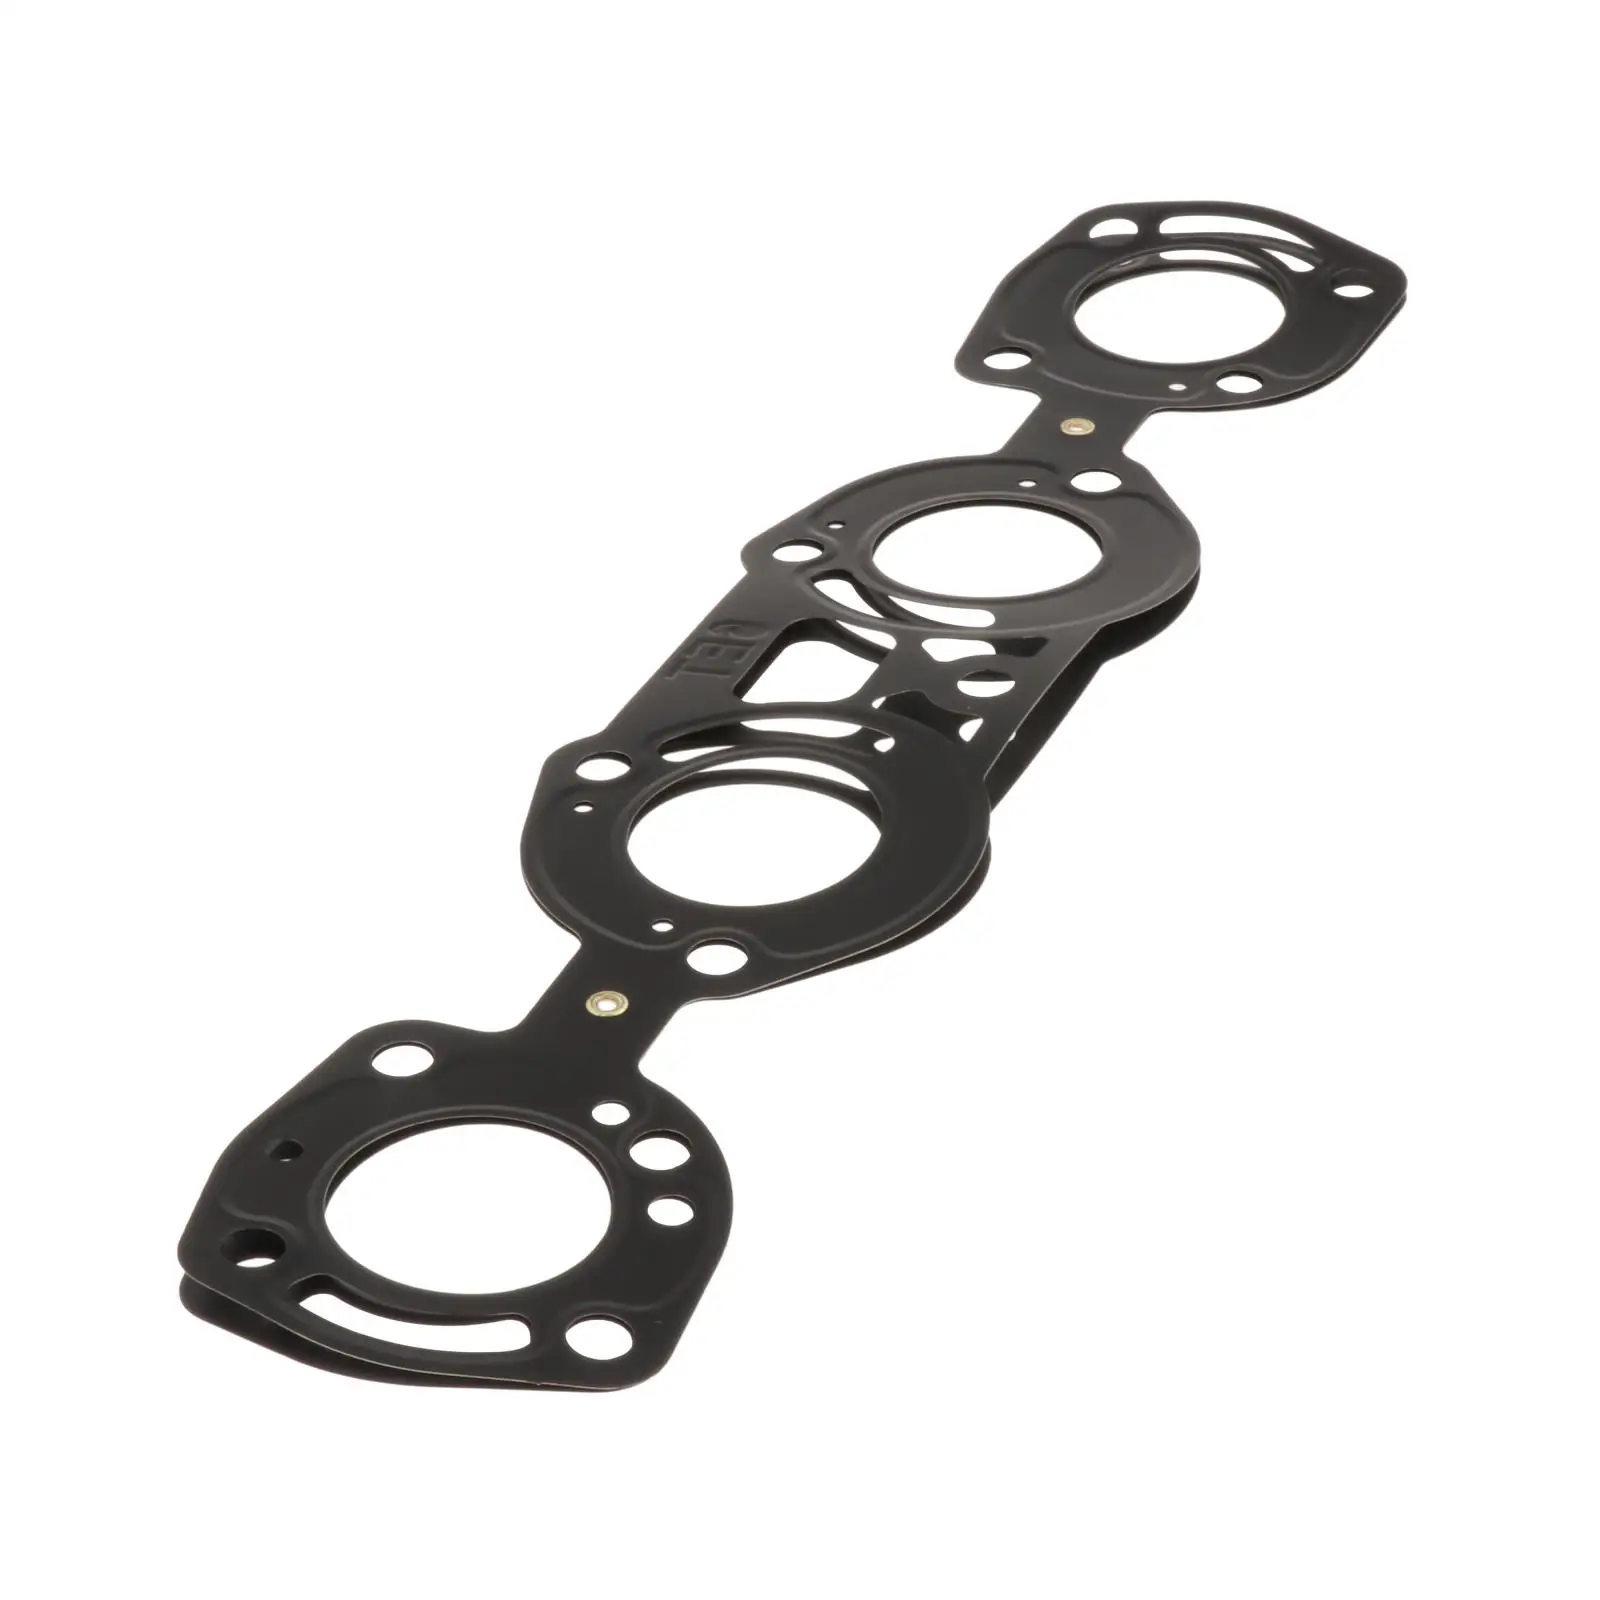 Exhaust Manifold Gasket Fit for Yamaha GP1800 6ET-14613-00-00 Replacement Parts Accessories